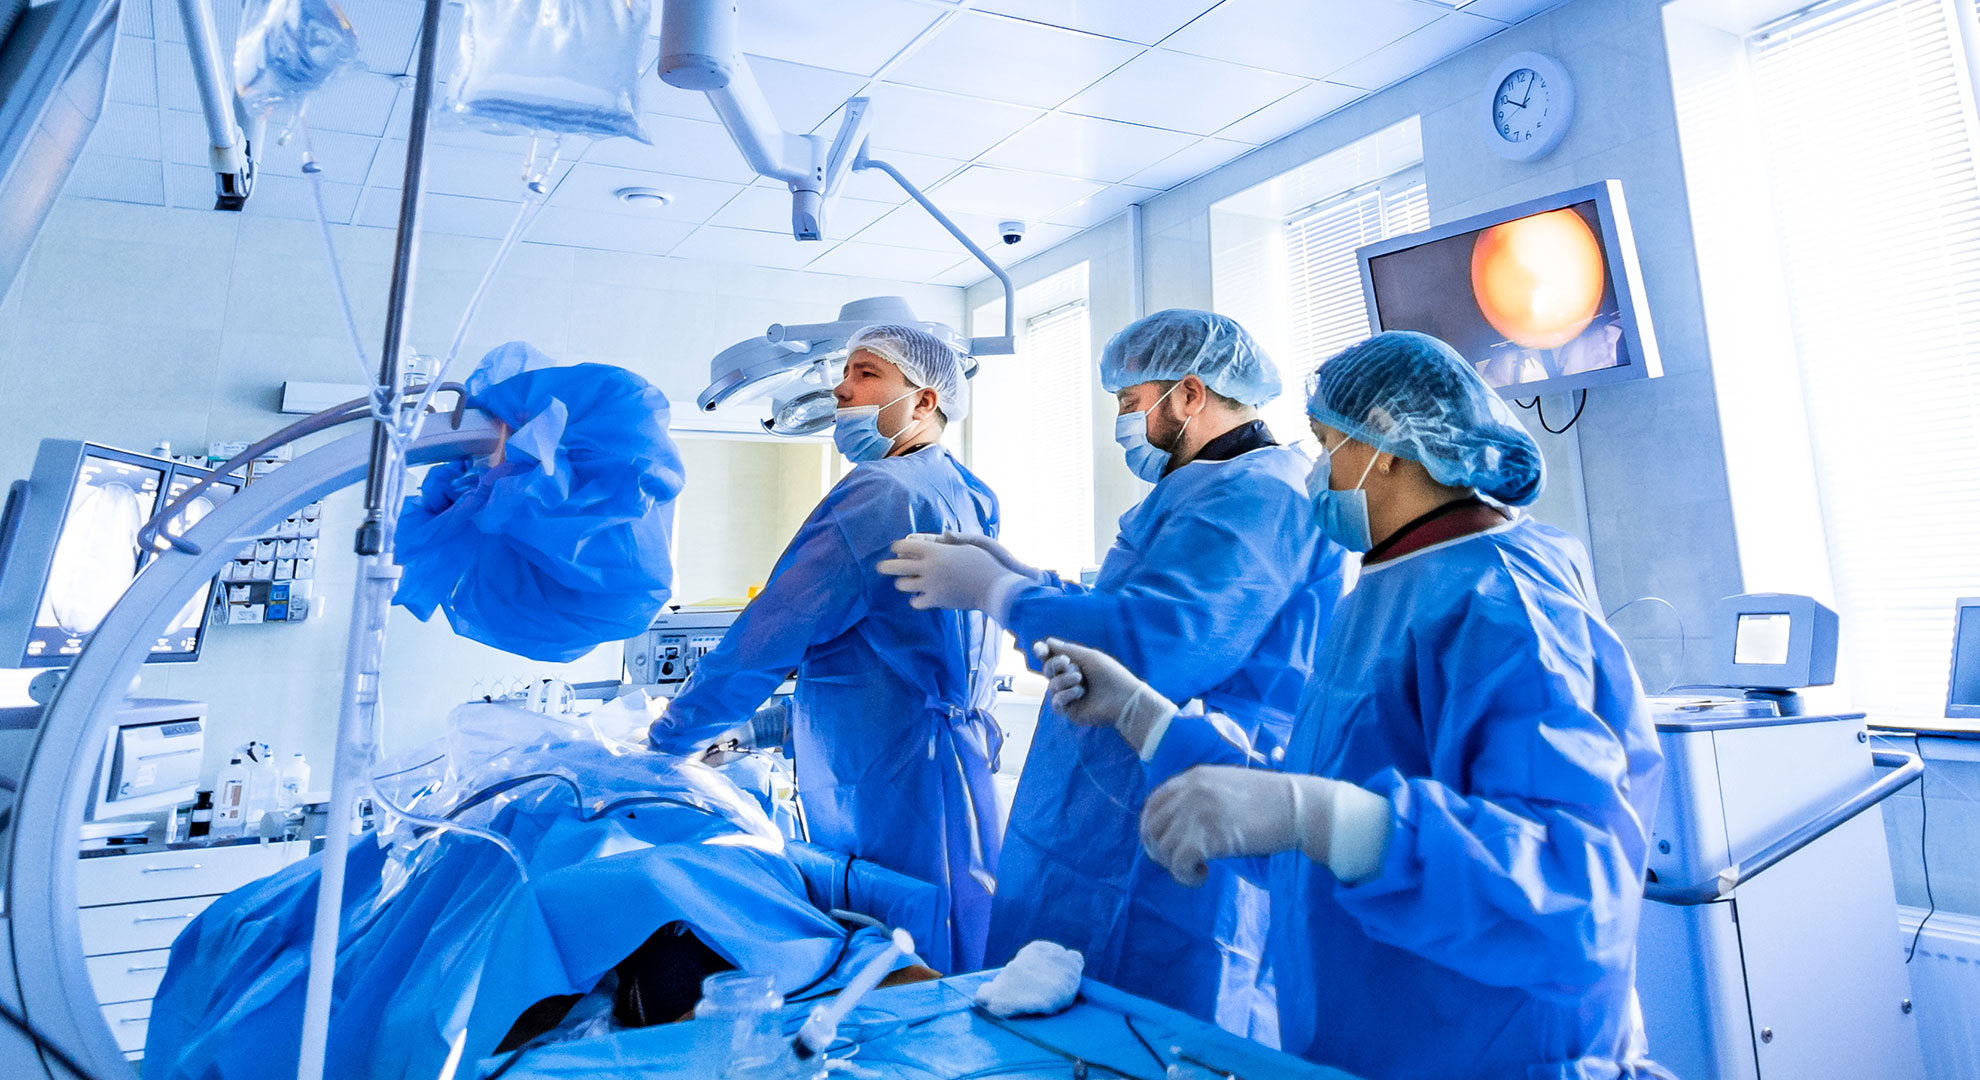 Air purification in operating rooms